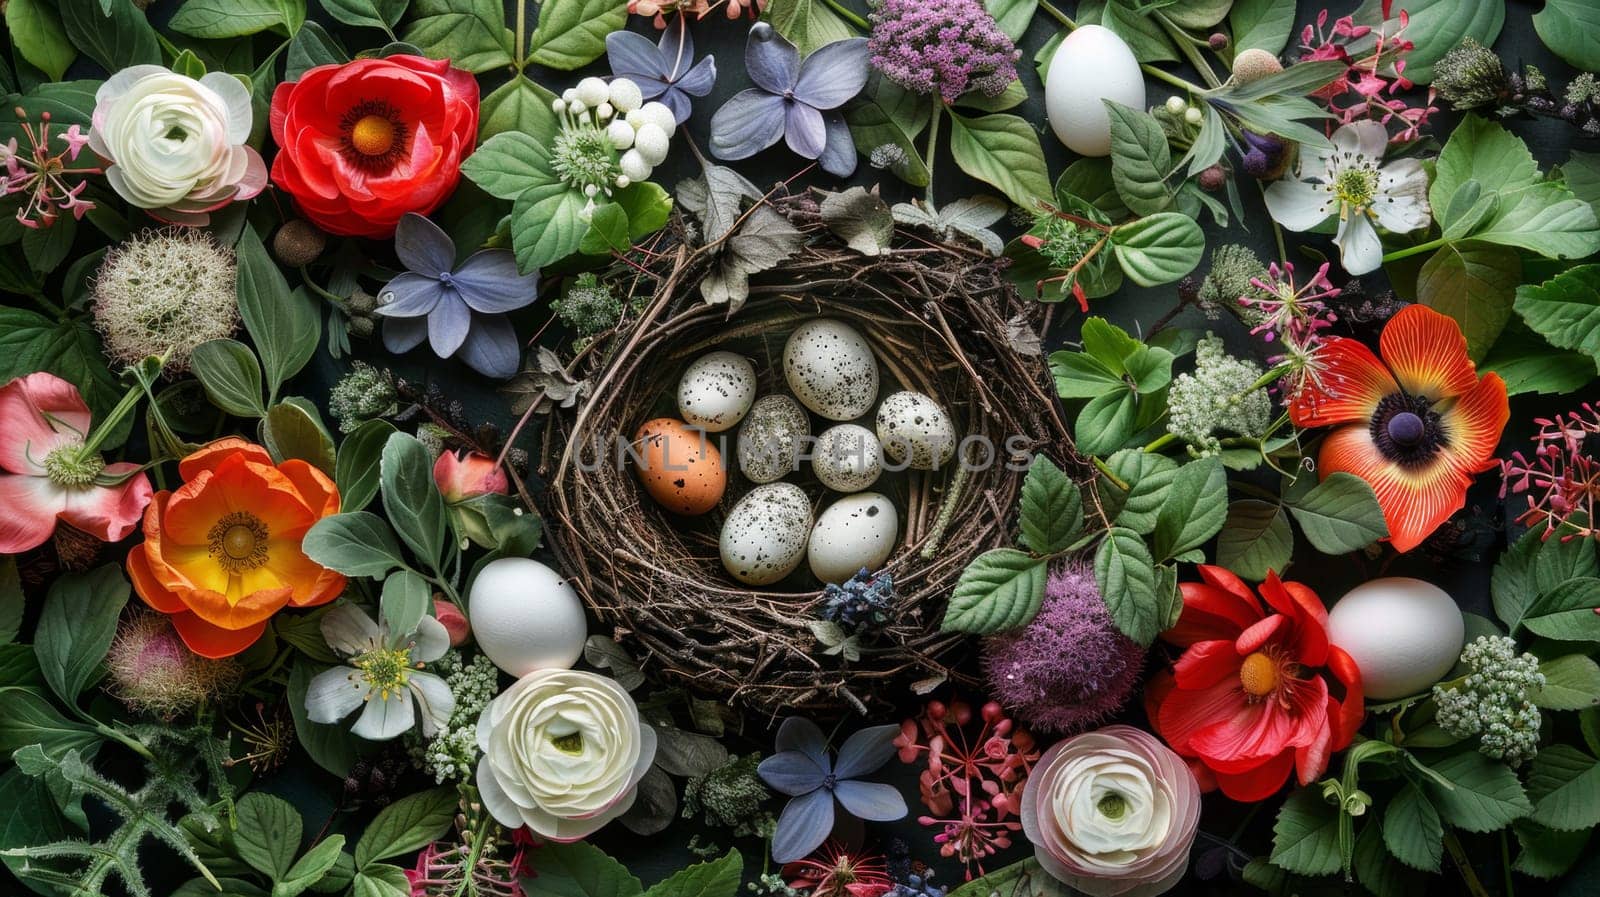 A nest with eggs and flowers on a table